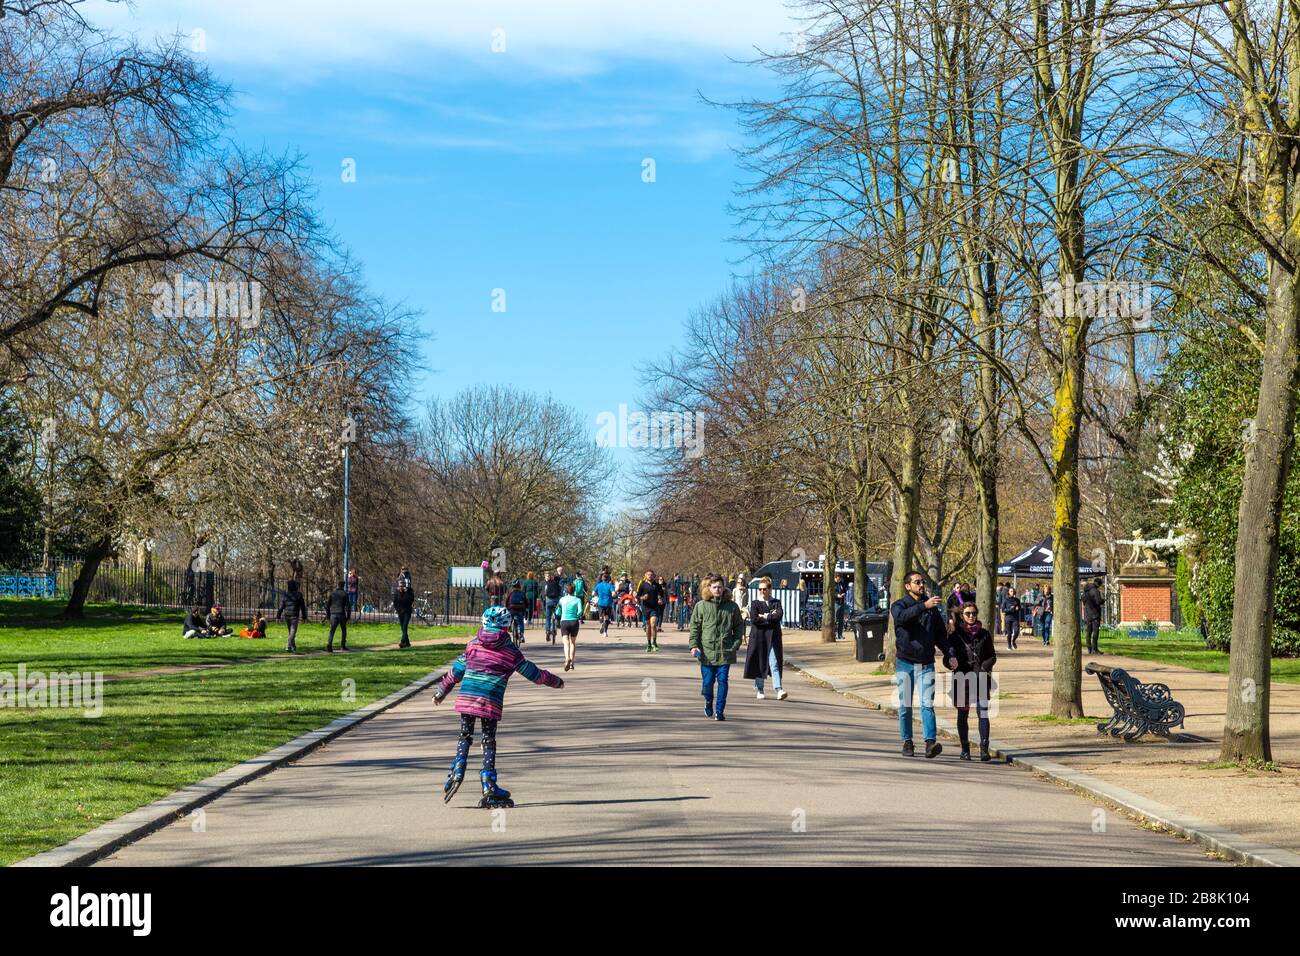 22 March 2020 - London, UK - global coronavirus pandemic, big groups of people visiting Victoria Park despite government urging people to stay at home and practice social distancing to prevent the spread of the coronavirus Covid-19, people going for a walk in the park Stock Photo